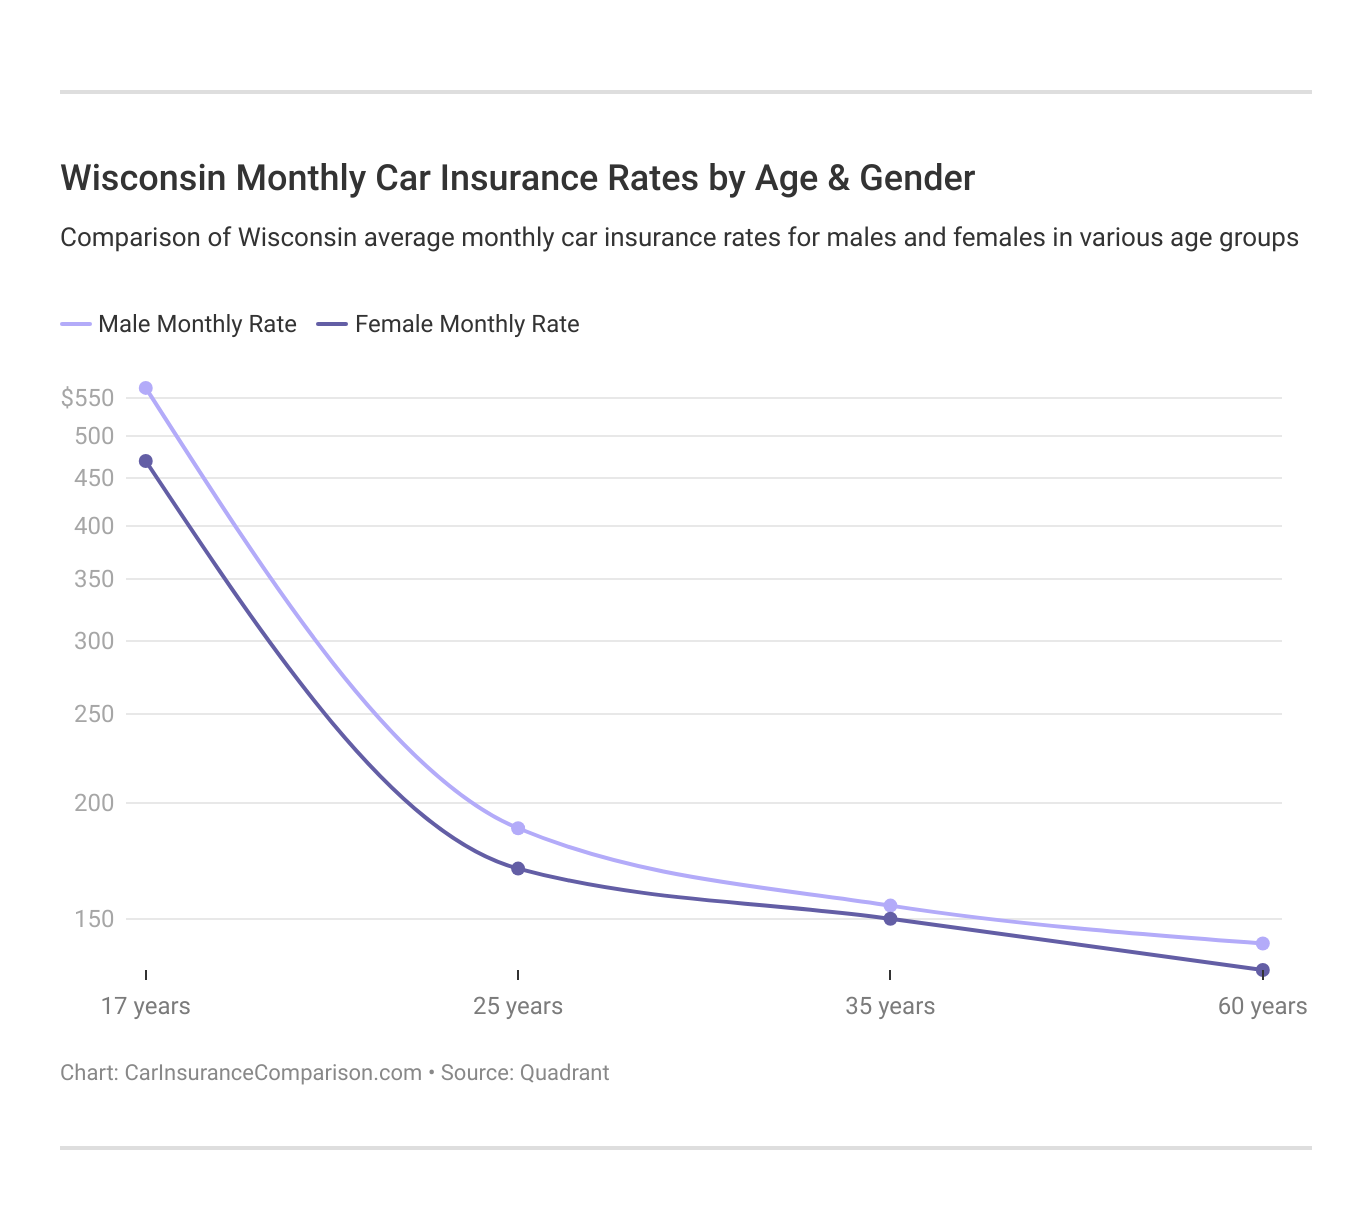 <h3>Wisconsin Monthly Car Insurance Rates by Age & Gender</h3>